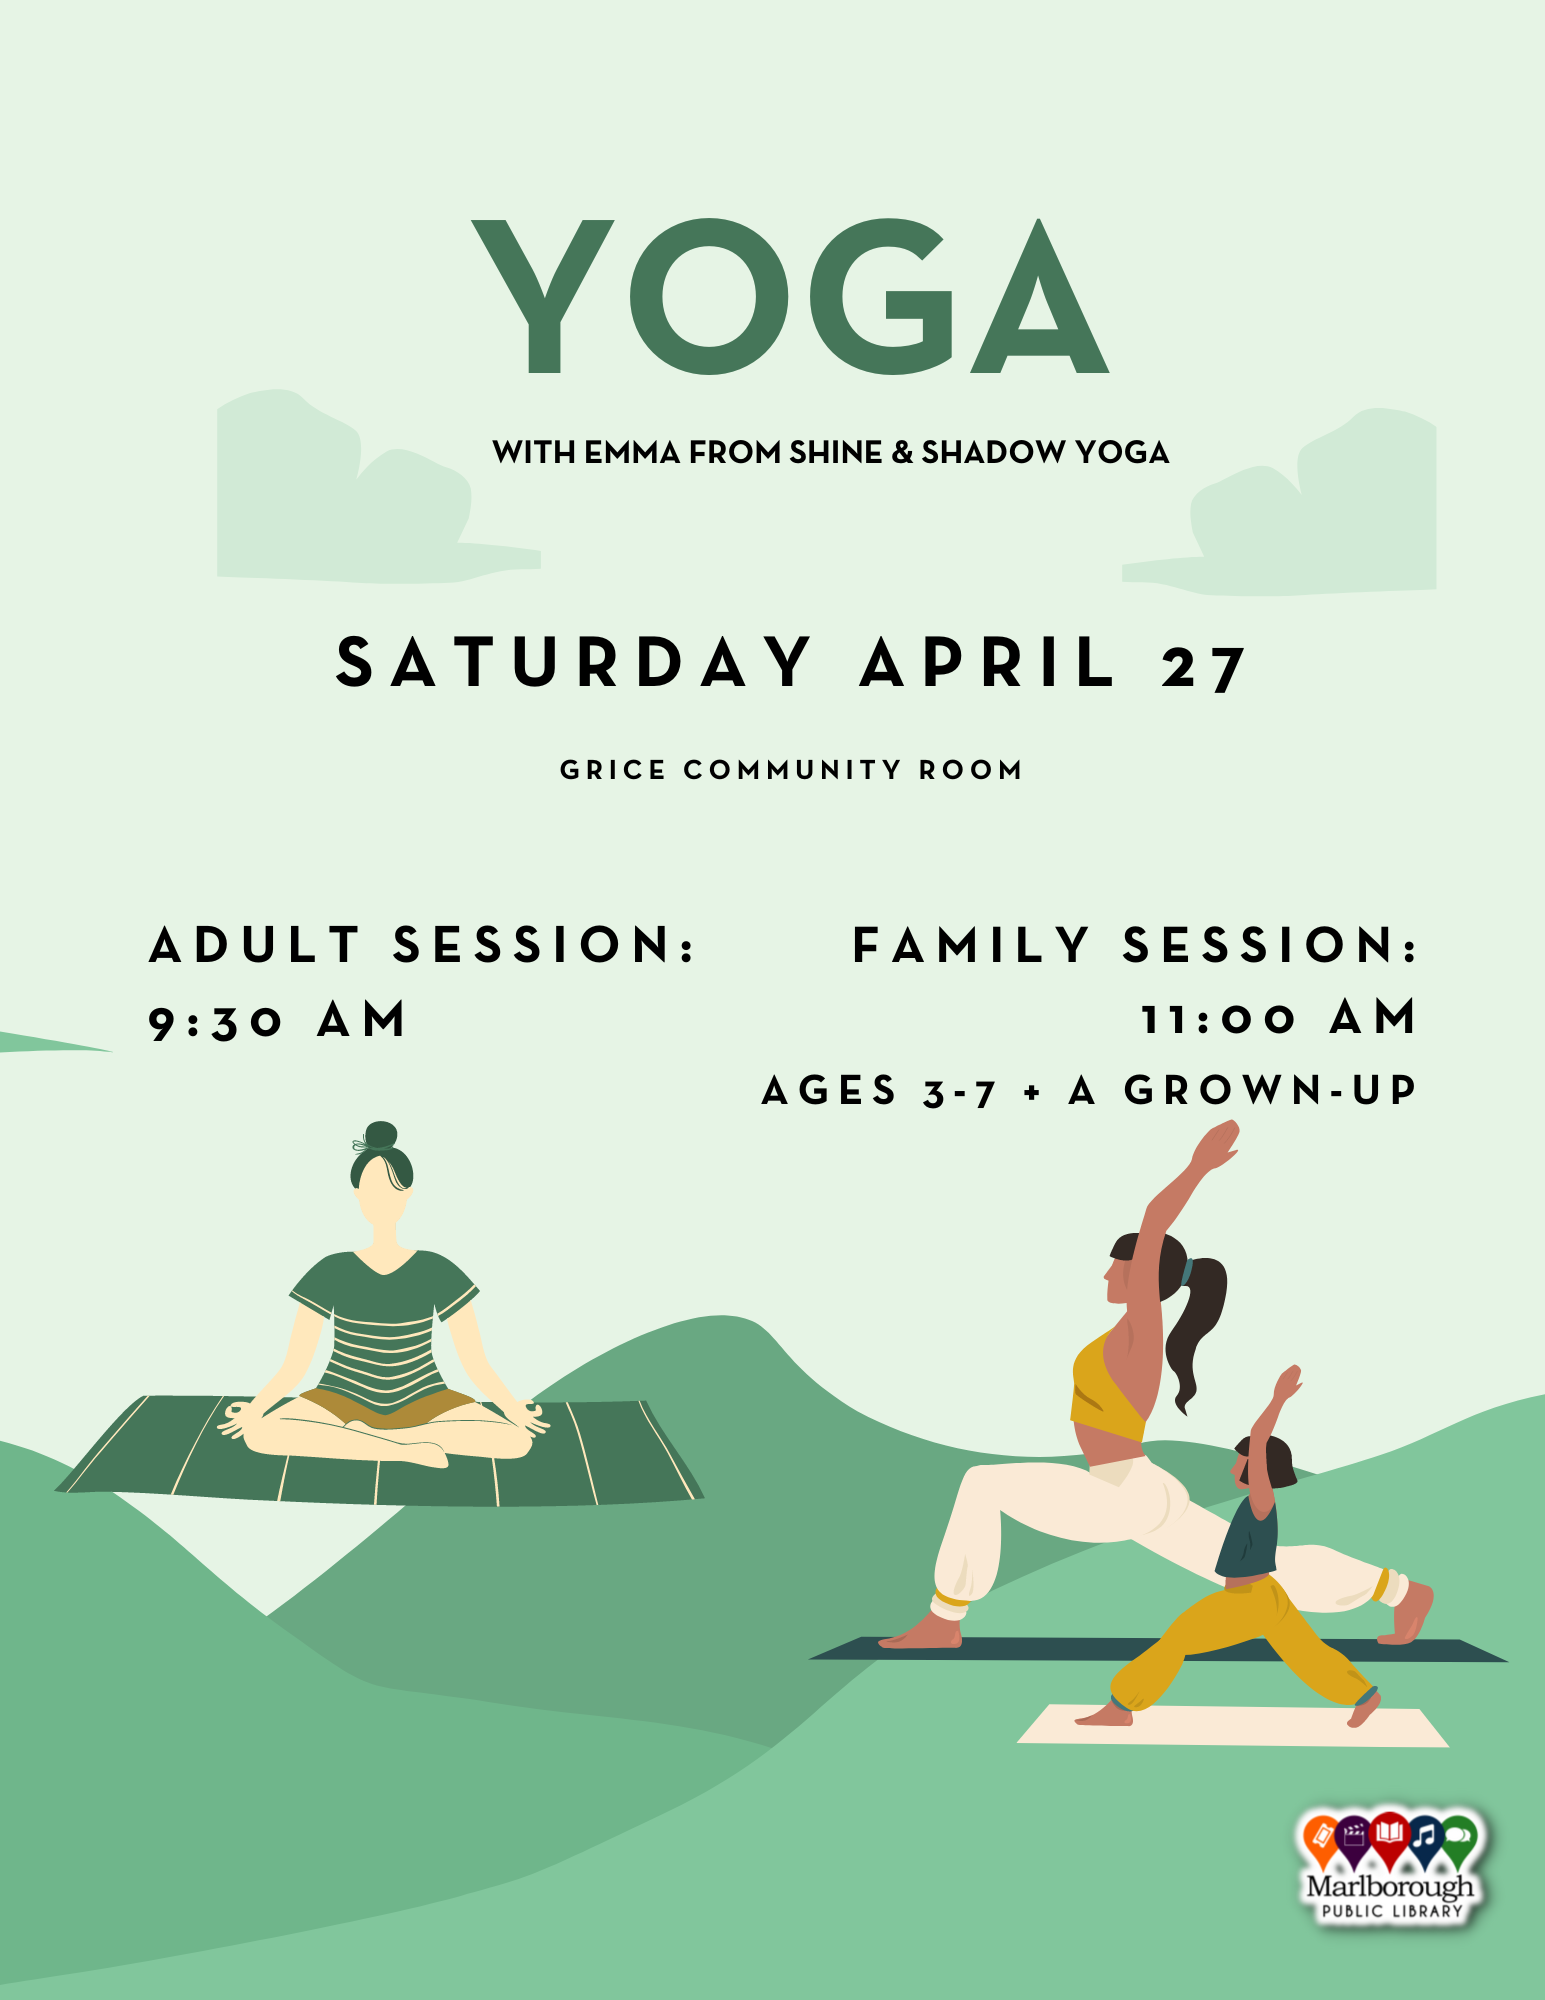 Family Yoga class at the Marlborough Public Library will happen on Saturday April 27 at 11:00 AM, in the Grice Community Room. Presented by Emma Bartolini of Shine and Shadow Yoga.